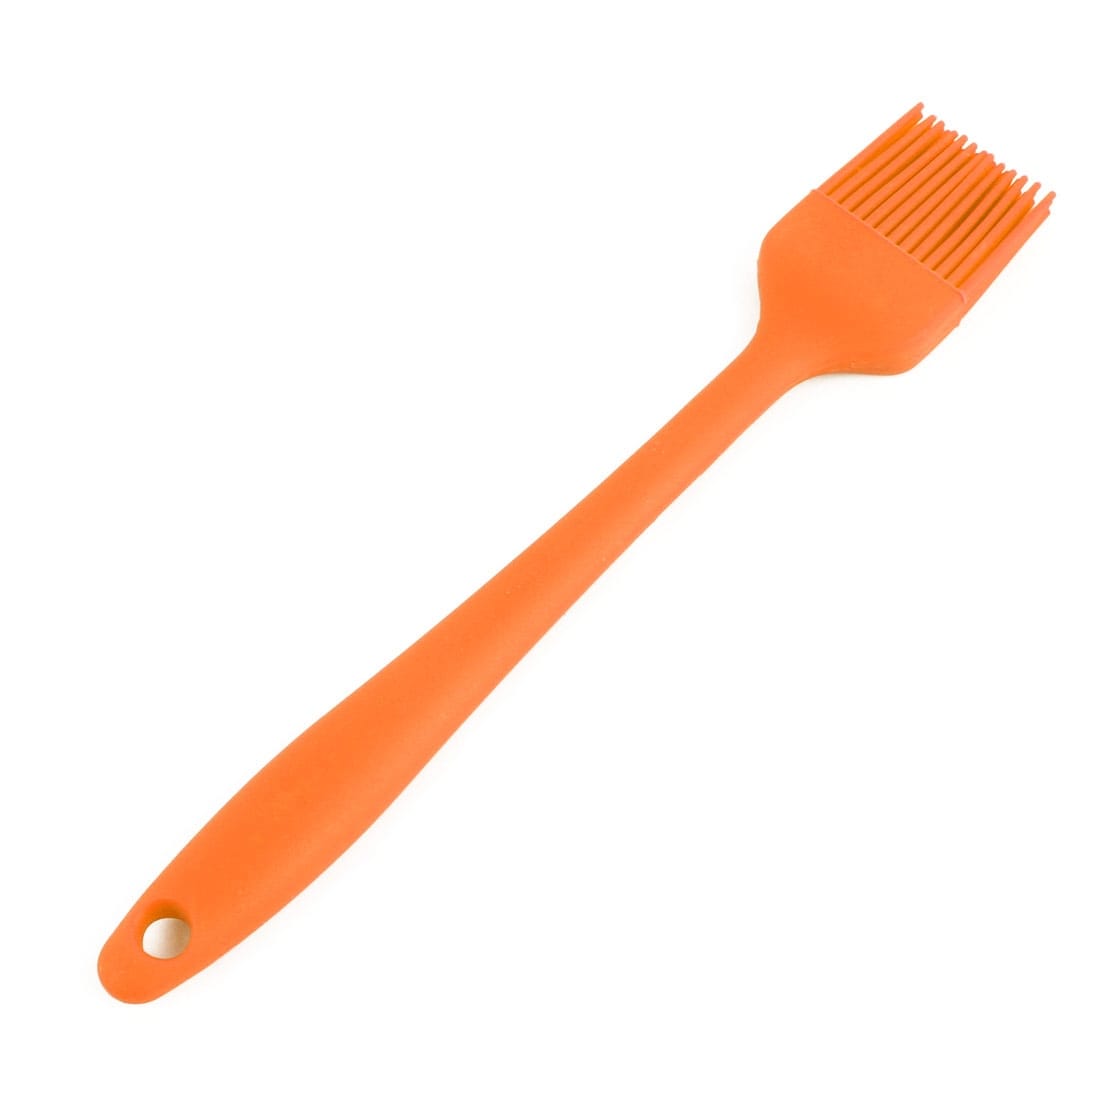 https://ak1.ostkcdn.com/images/products/is/images/direct/163b92a9d5d6b7f2f9e3aad14f84c875c9f09f4e/Kitchenware-Silicone-Cooking-Tool-Baster-Turkey-Barbecue-Pastry-Brush-Orange.jpg